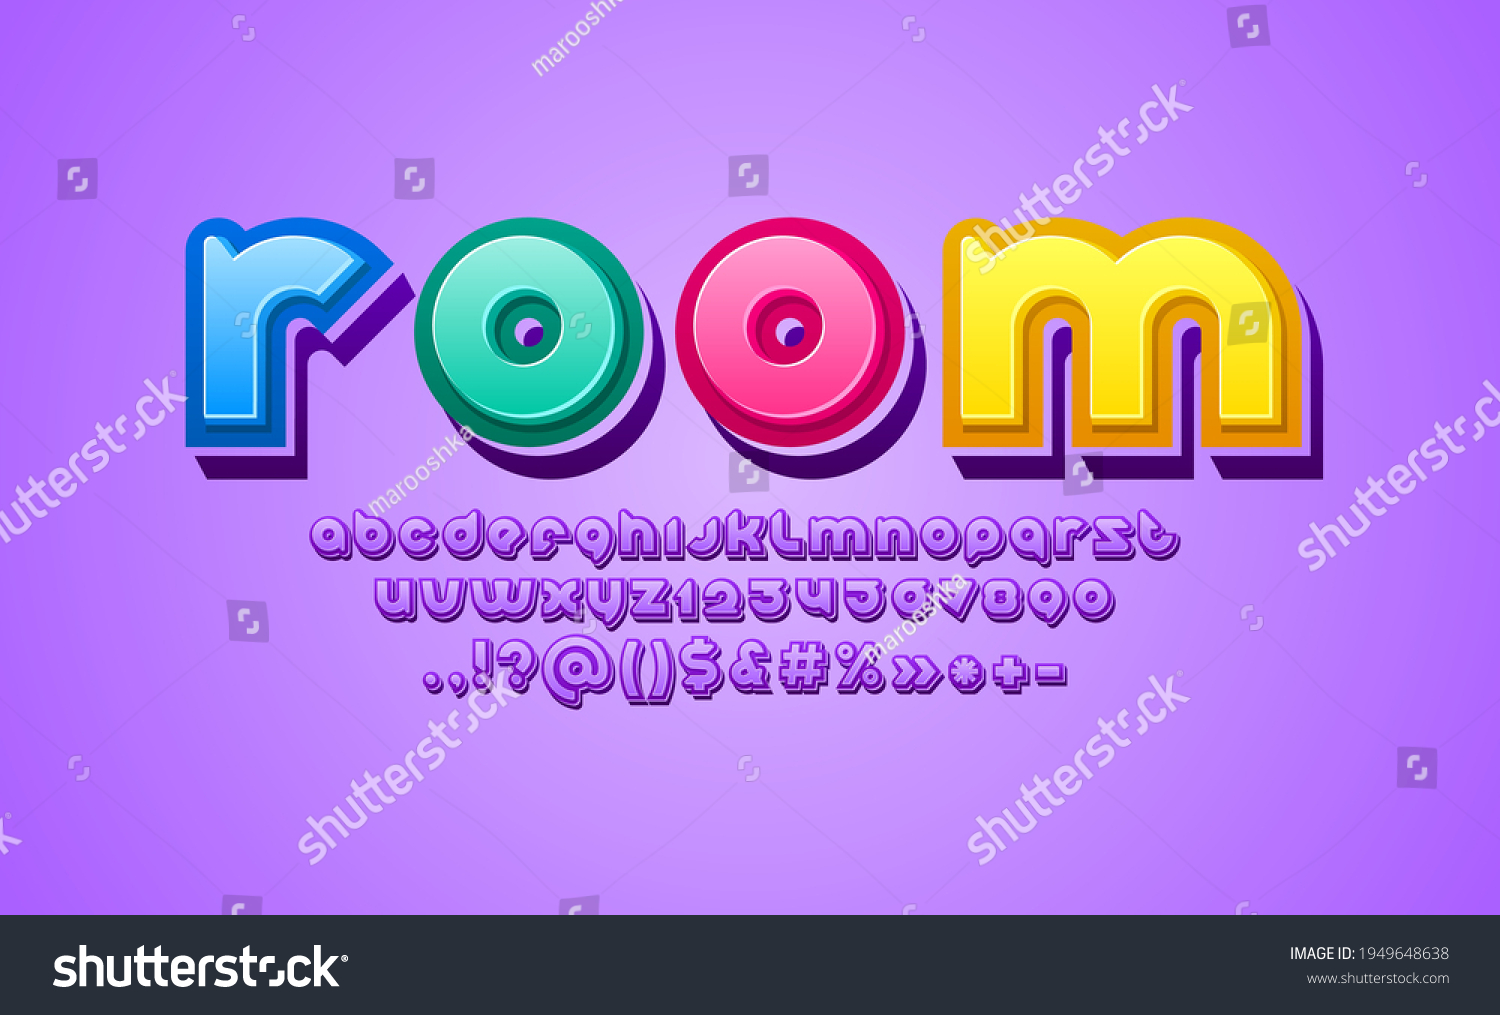 SVG of 3D trendy font, bright rounded alphabet, letters (A, B, C, D, E, F, G, H, I, J, K, L, M, N, O, P, Q, R, S, T, U, V, W, X, Y, Z) and numbers (0, 1, 2, 3, 4, 5, 6, 7, 8, 9), vector illustration 10eps svg